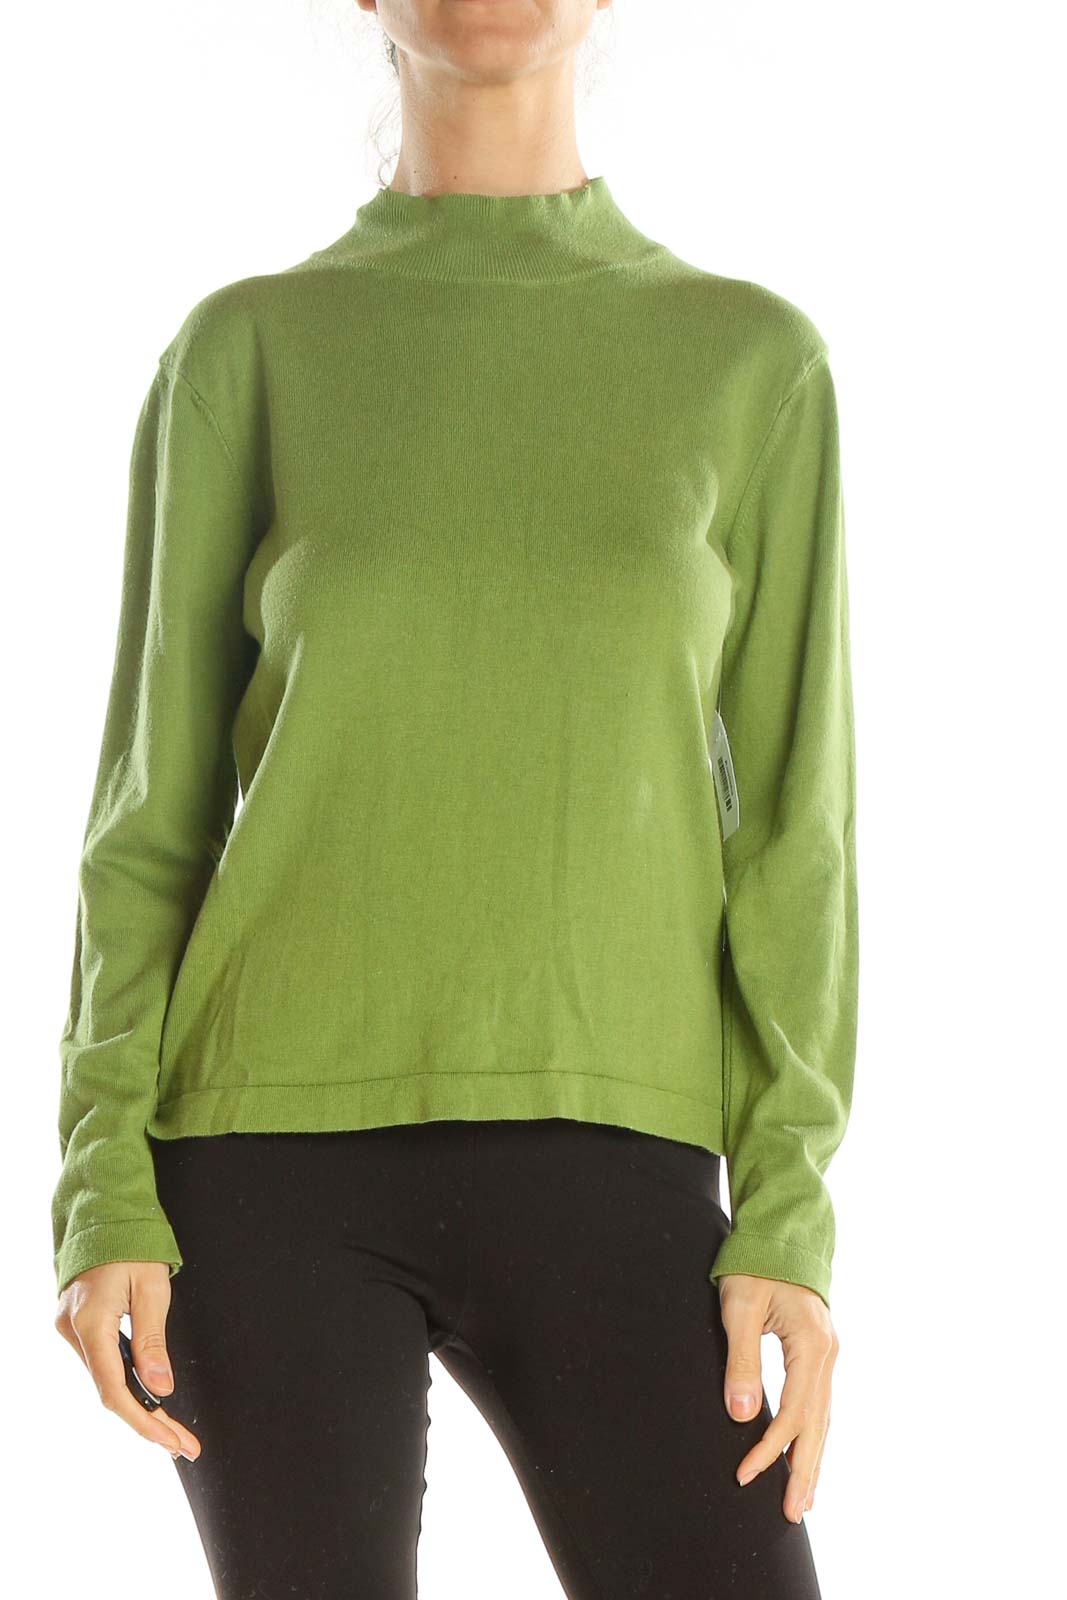 Green All Day Wear Sweater Front